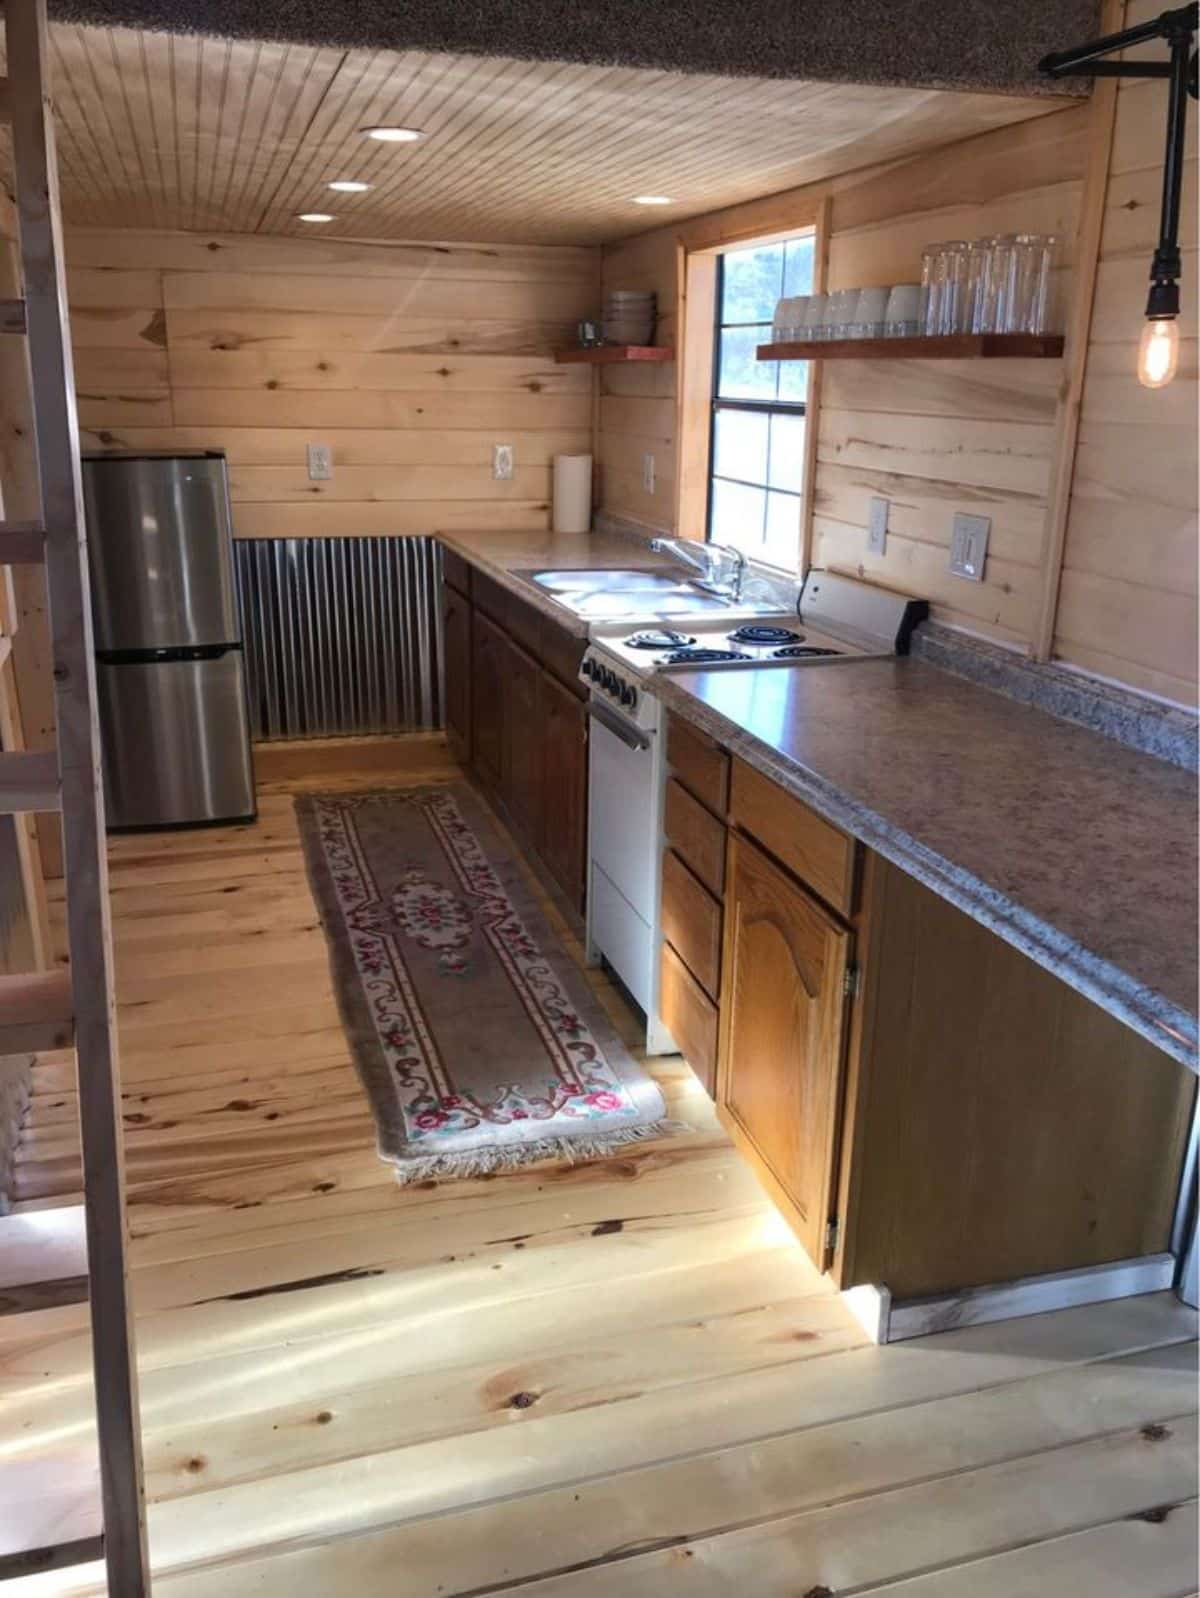 kitchen area of $55k double lofted tiny home is long with all the necessary appliances